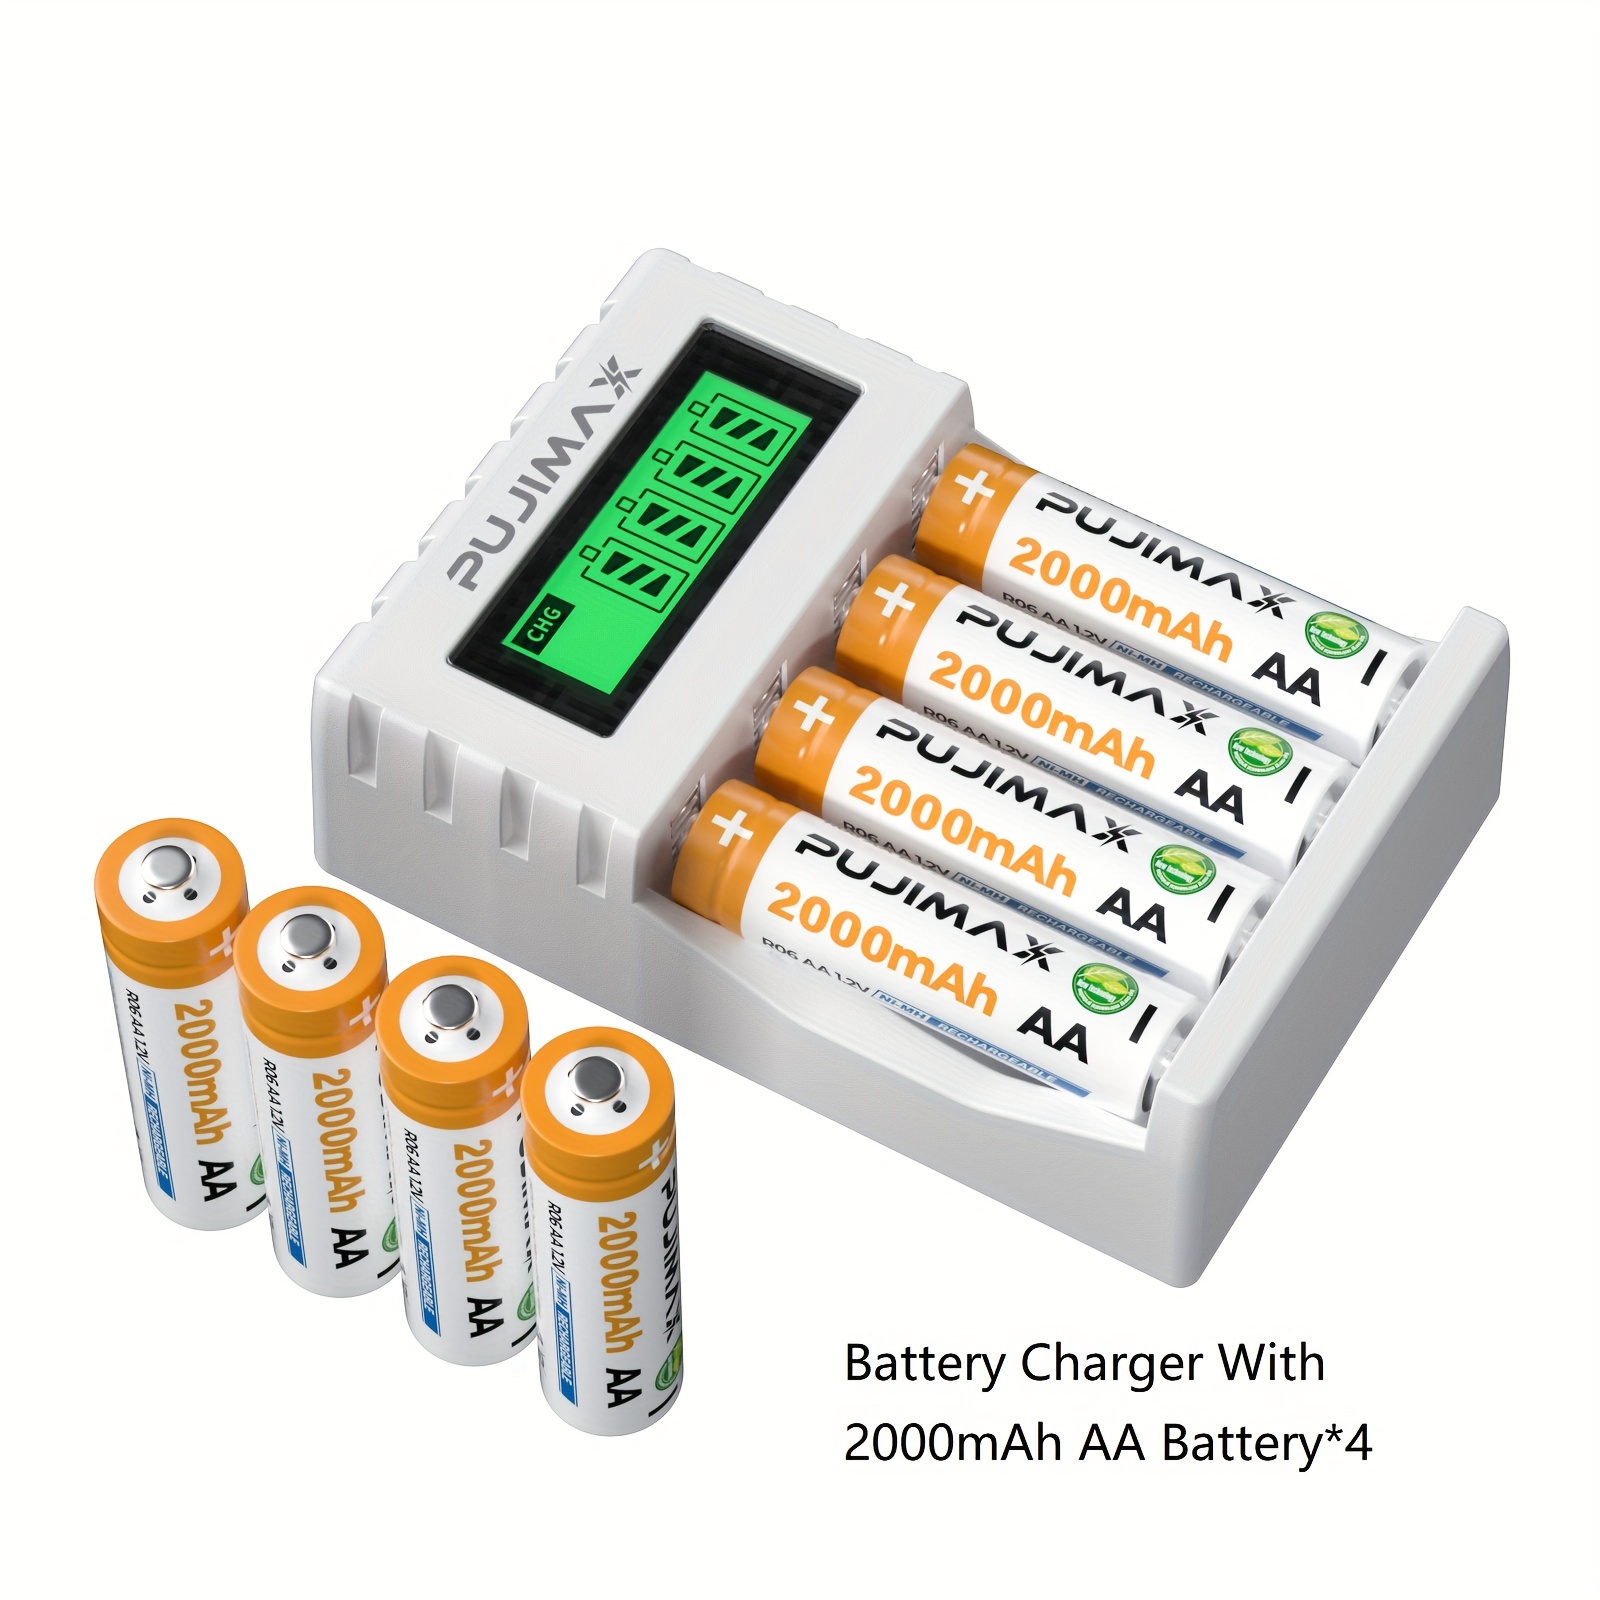 Acheter PALO LCD USB chargeur de batterie intelligent pour Ni-MH Ni-CD AA  AAA batterie rechargeable 3000 mAh Ni-MH 1,2 V AA piles rechargeables Kit  de charge batterie